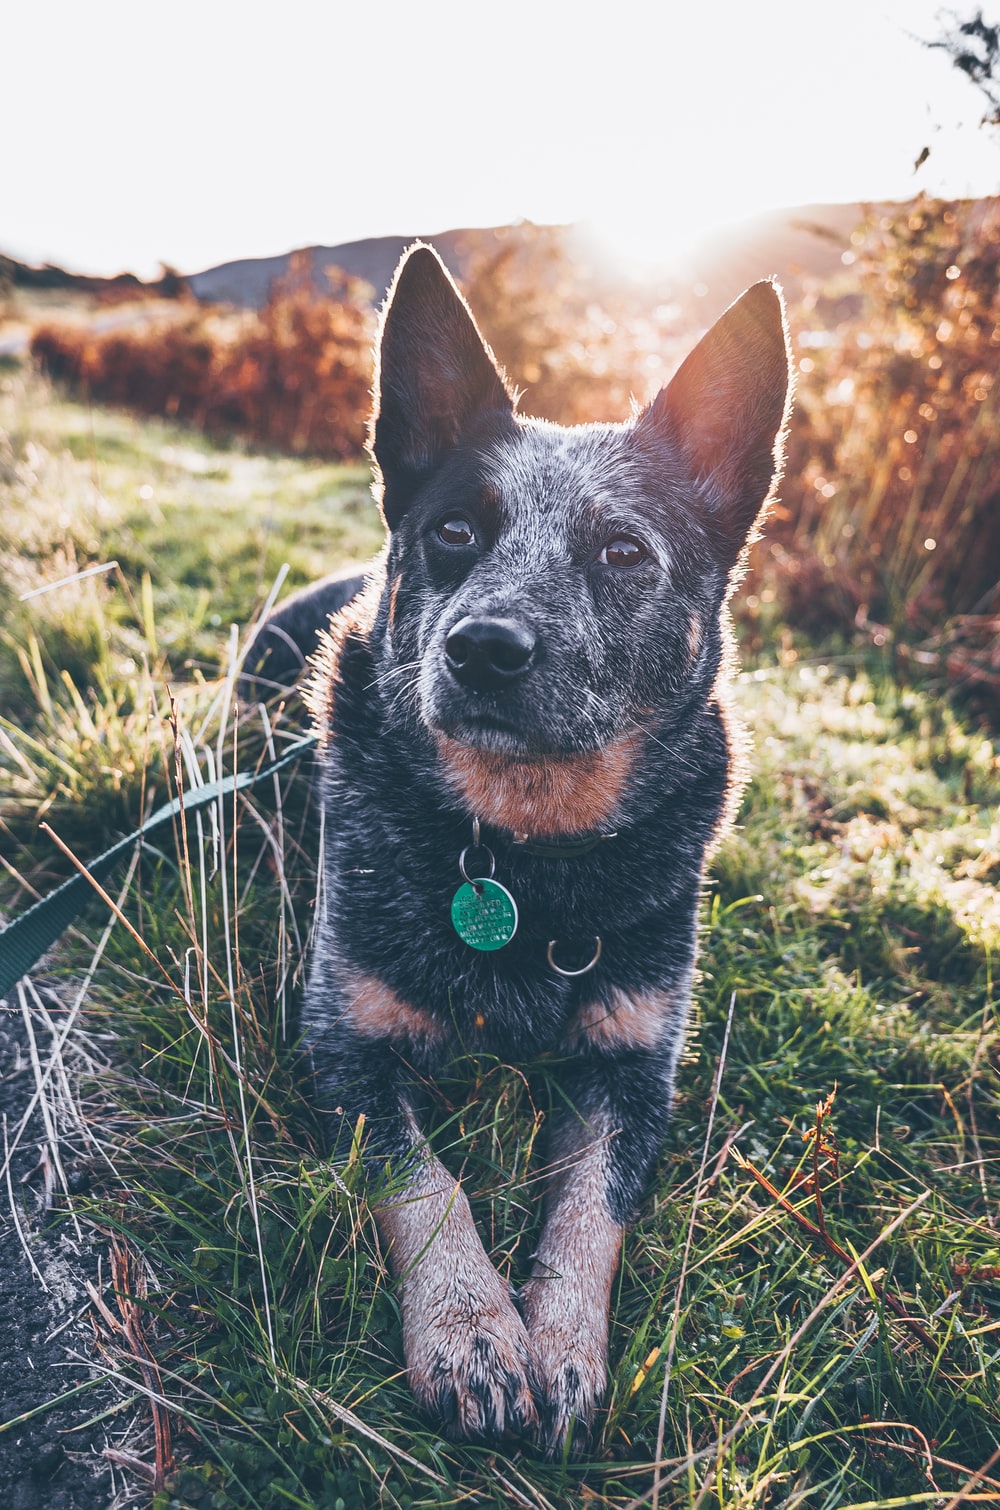 Australian Cattle Dog Picture. Download Free Image